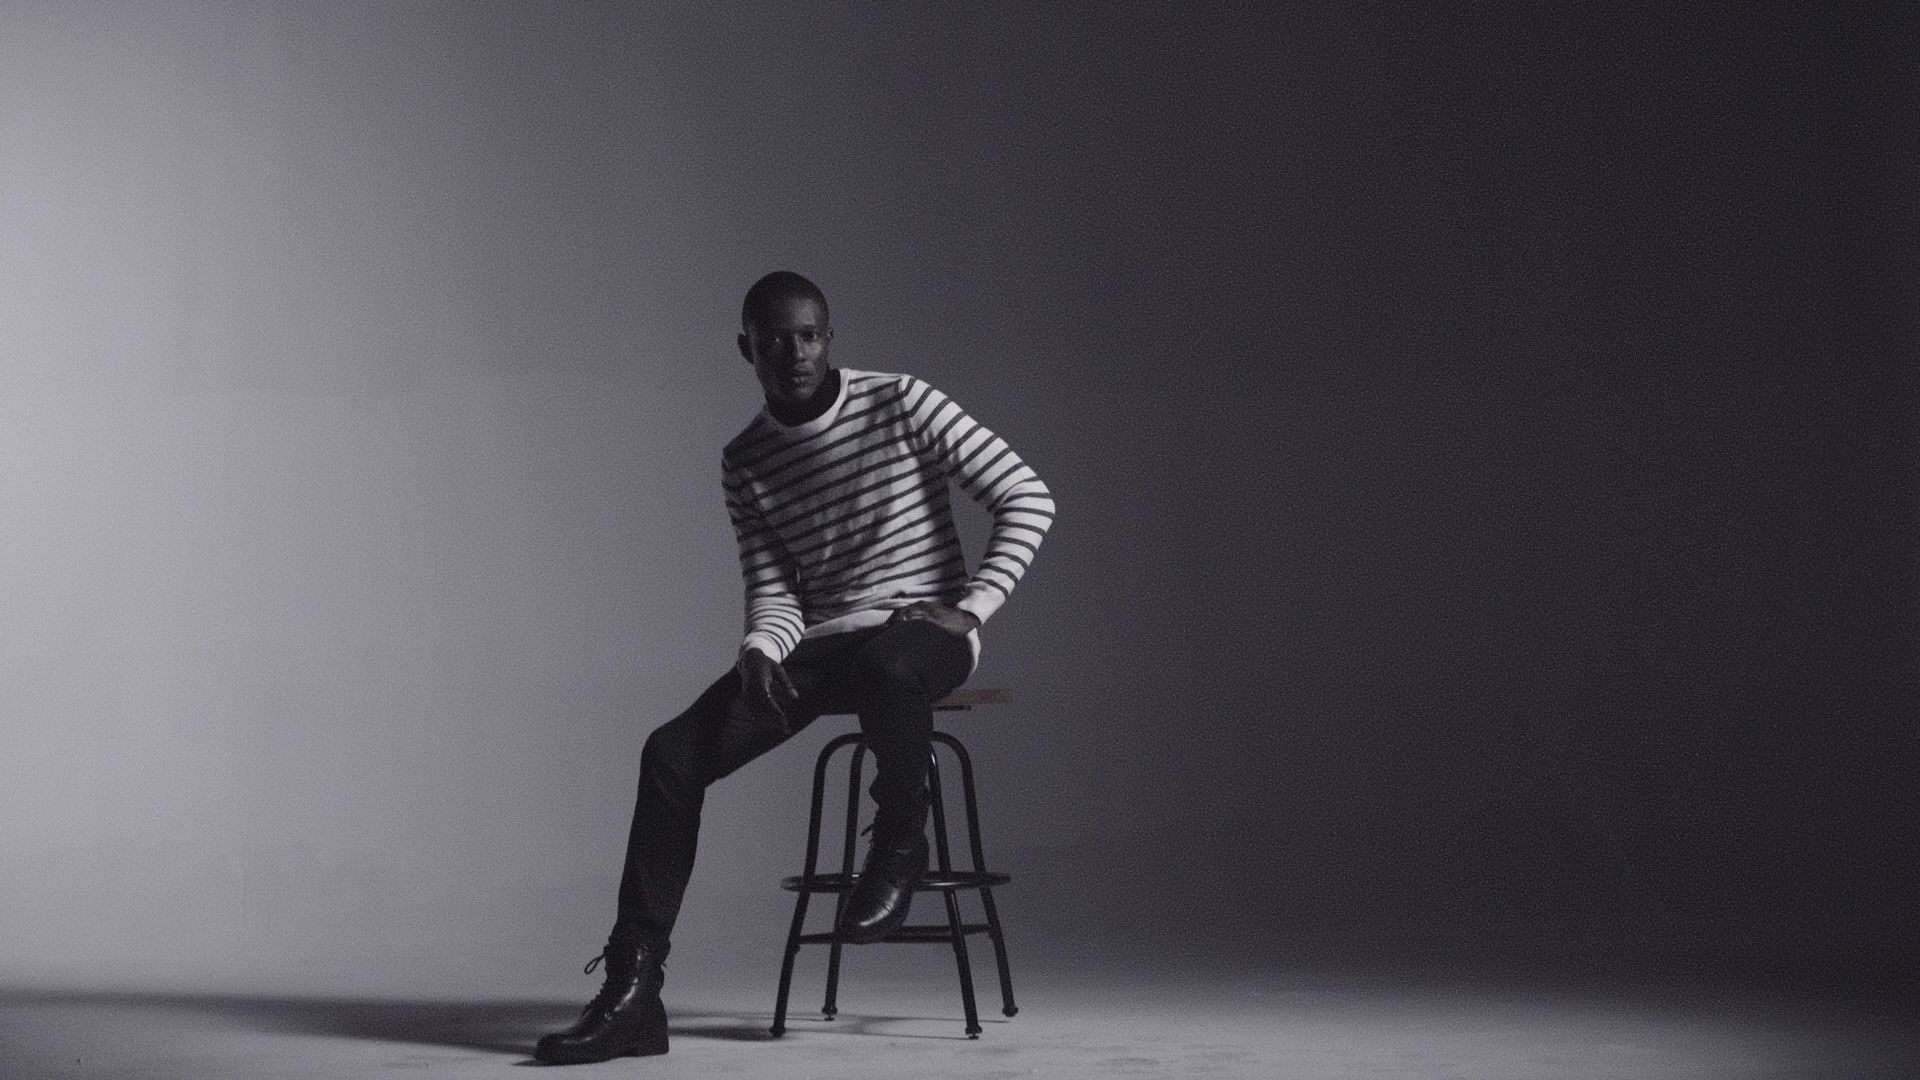 Black and white of African AMerican man sitting on a stool wearing a striped shirt with pants